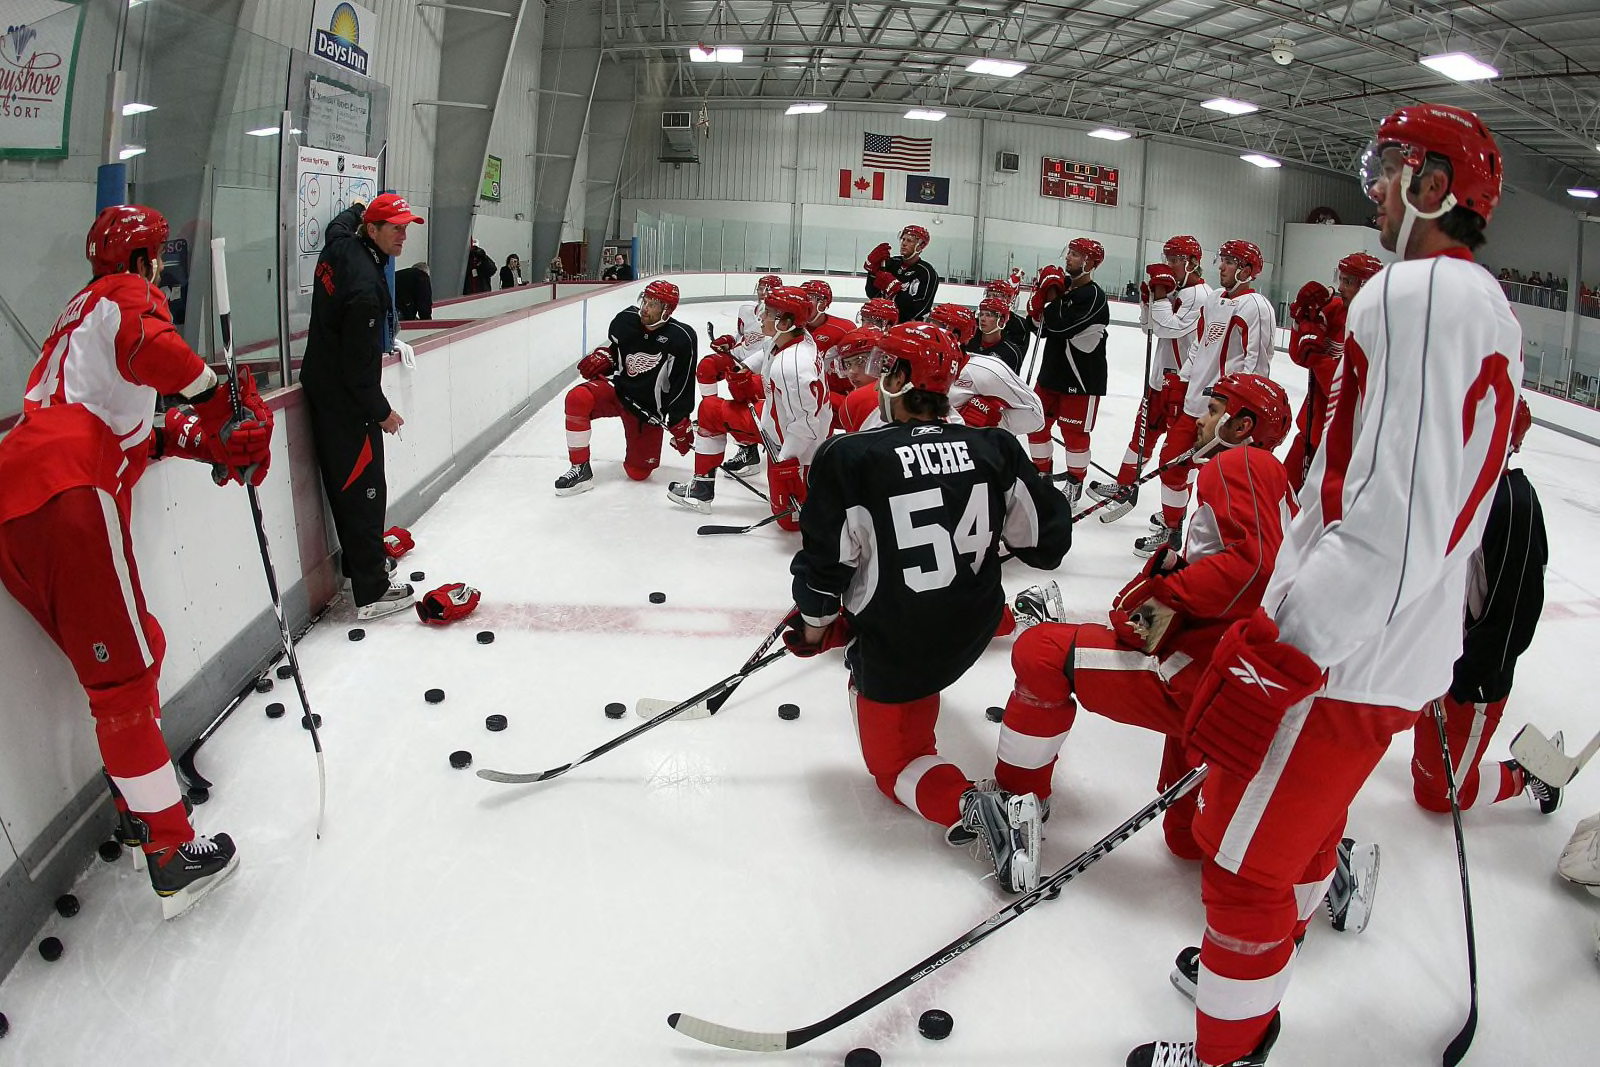 2021 Detroit Red Wings Training Camp